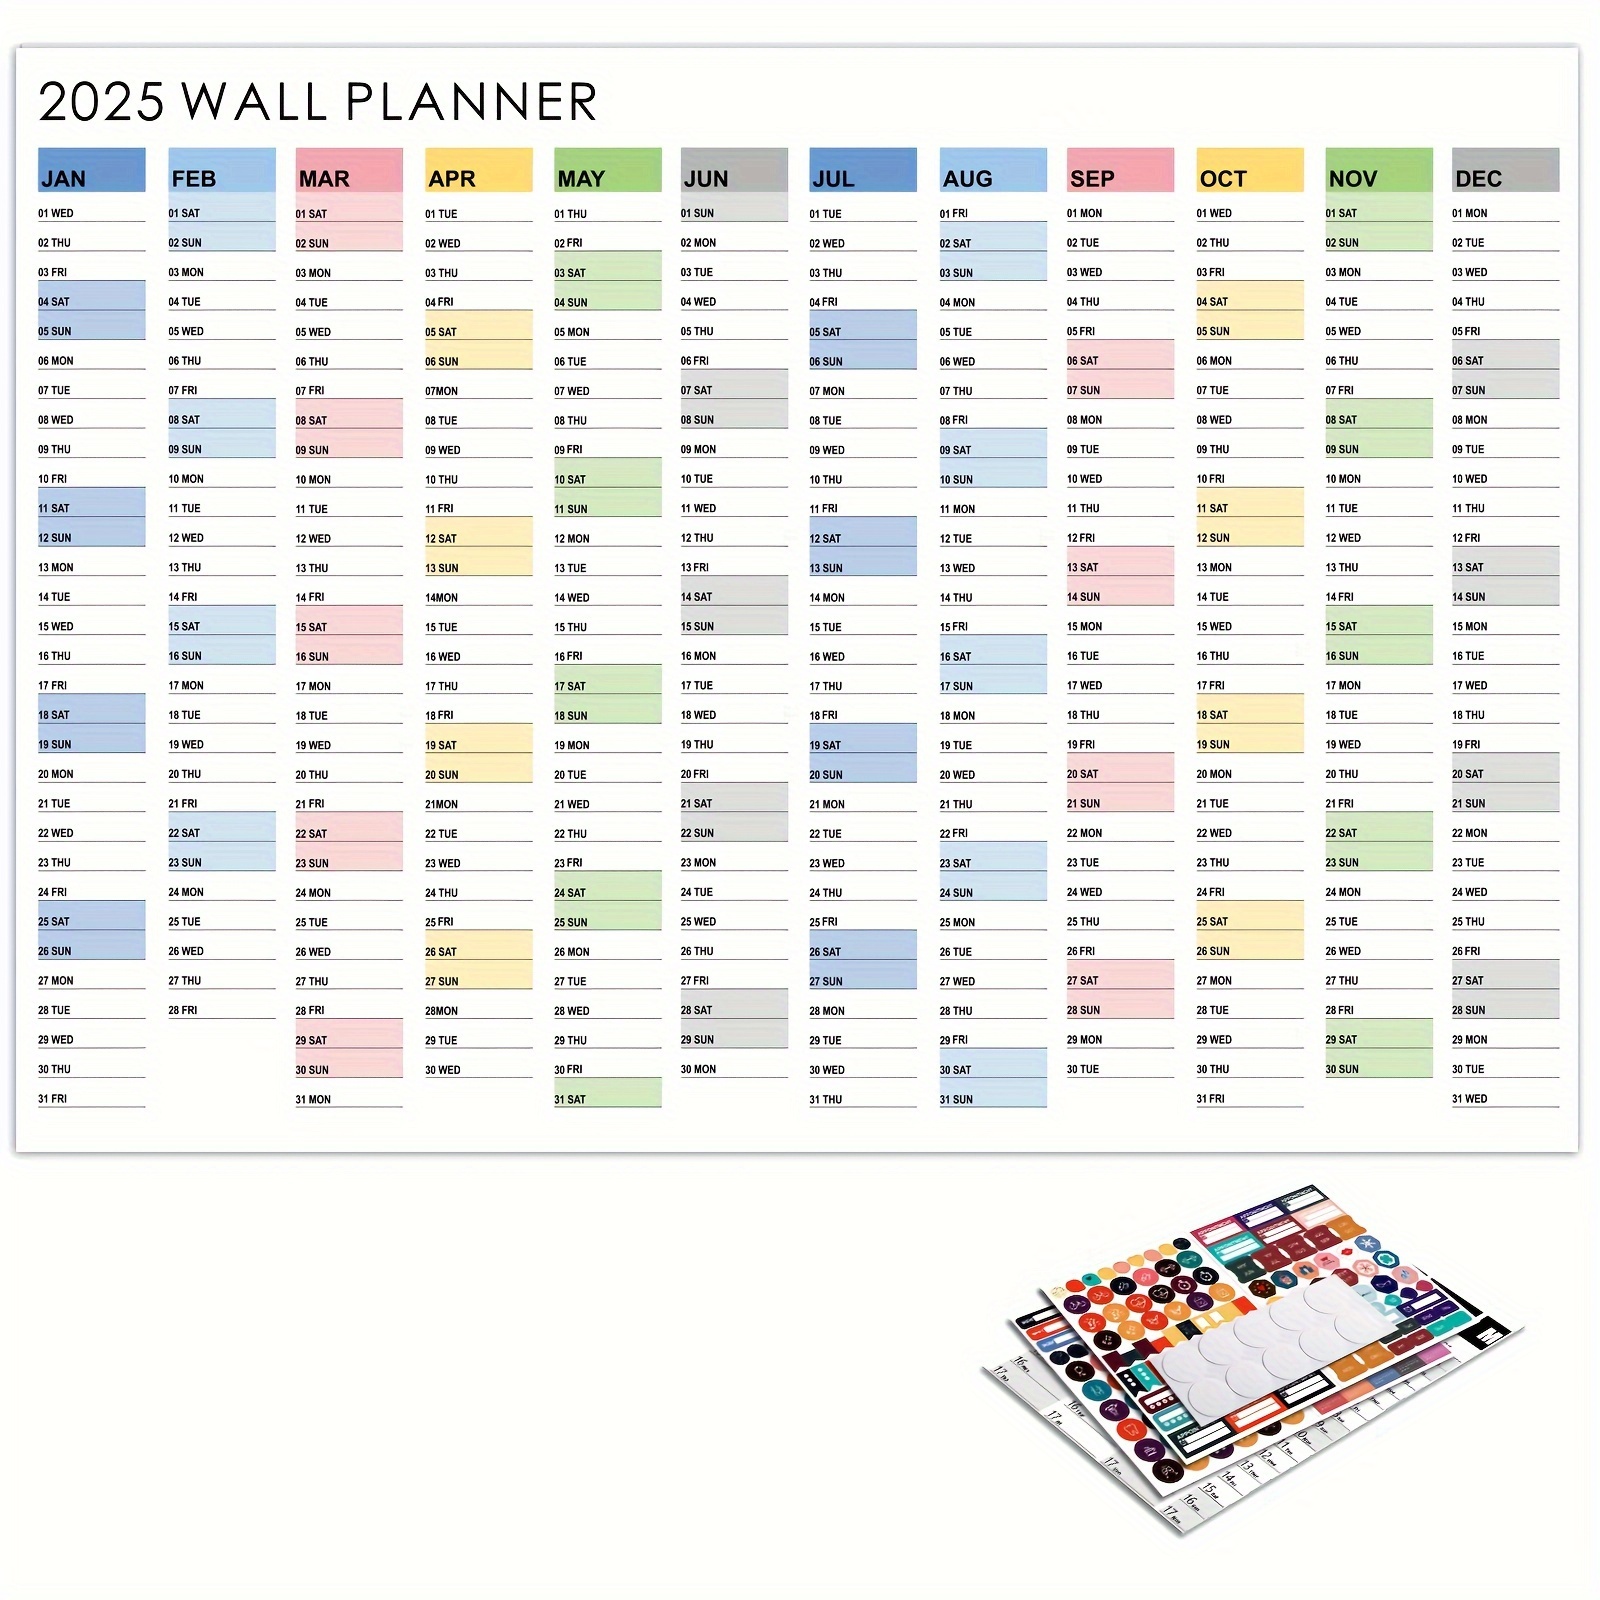 

1pc 2024 Wall Planner Calendar Full Year View Runs From January To December, Trip Planning Calendar For Home Office School